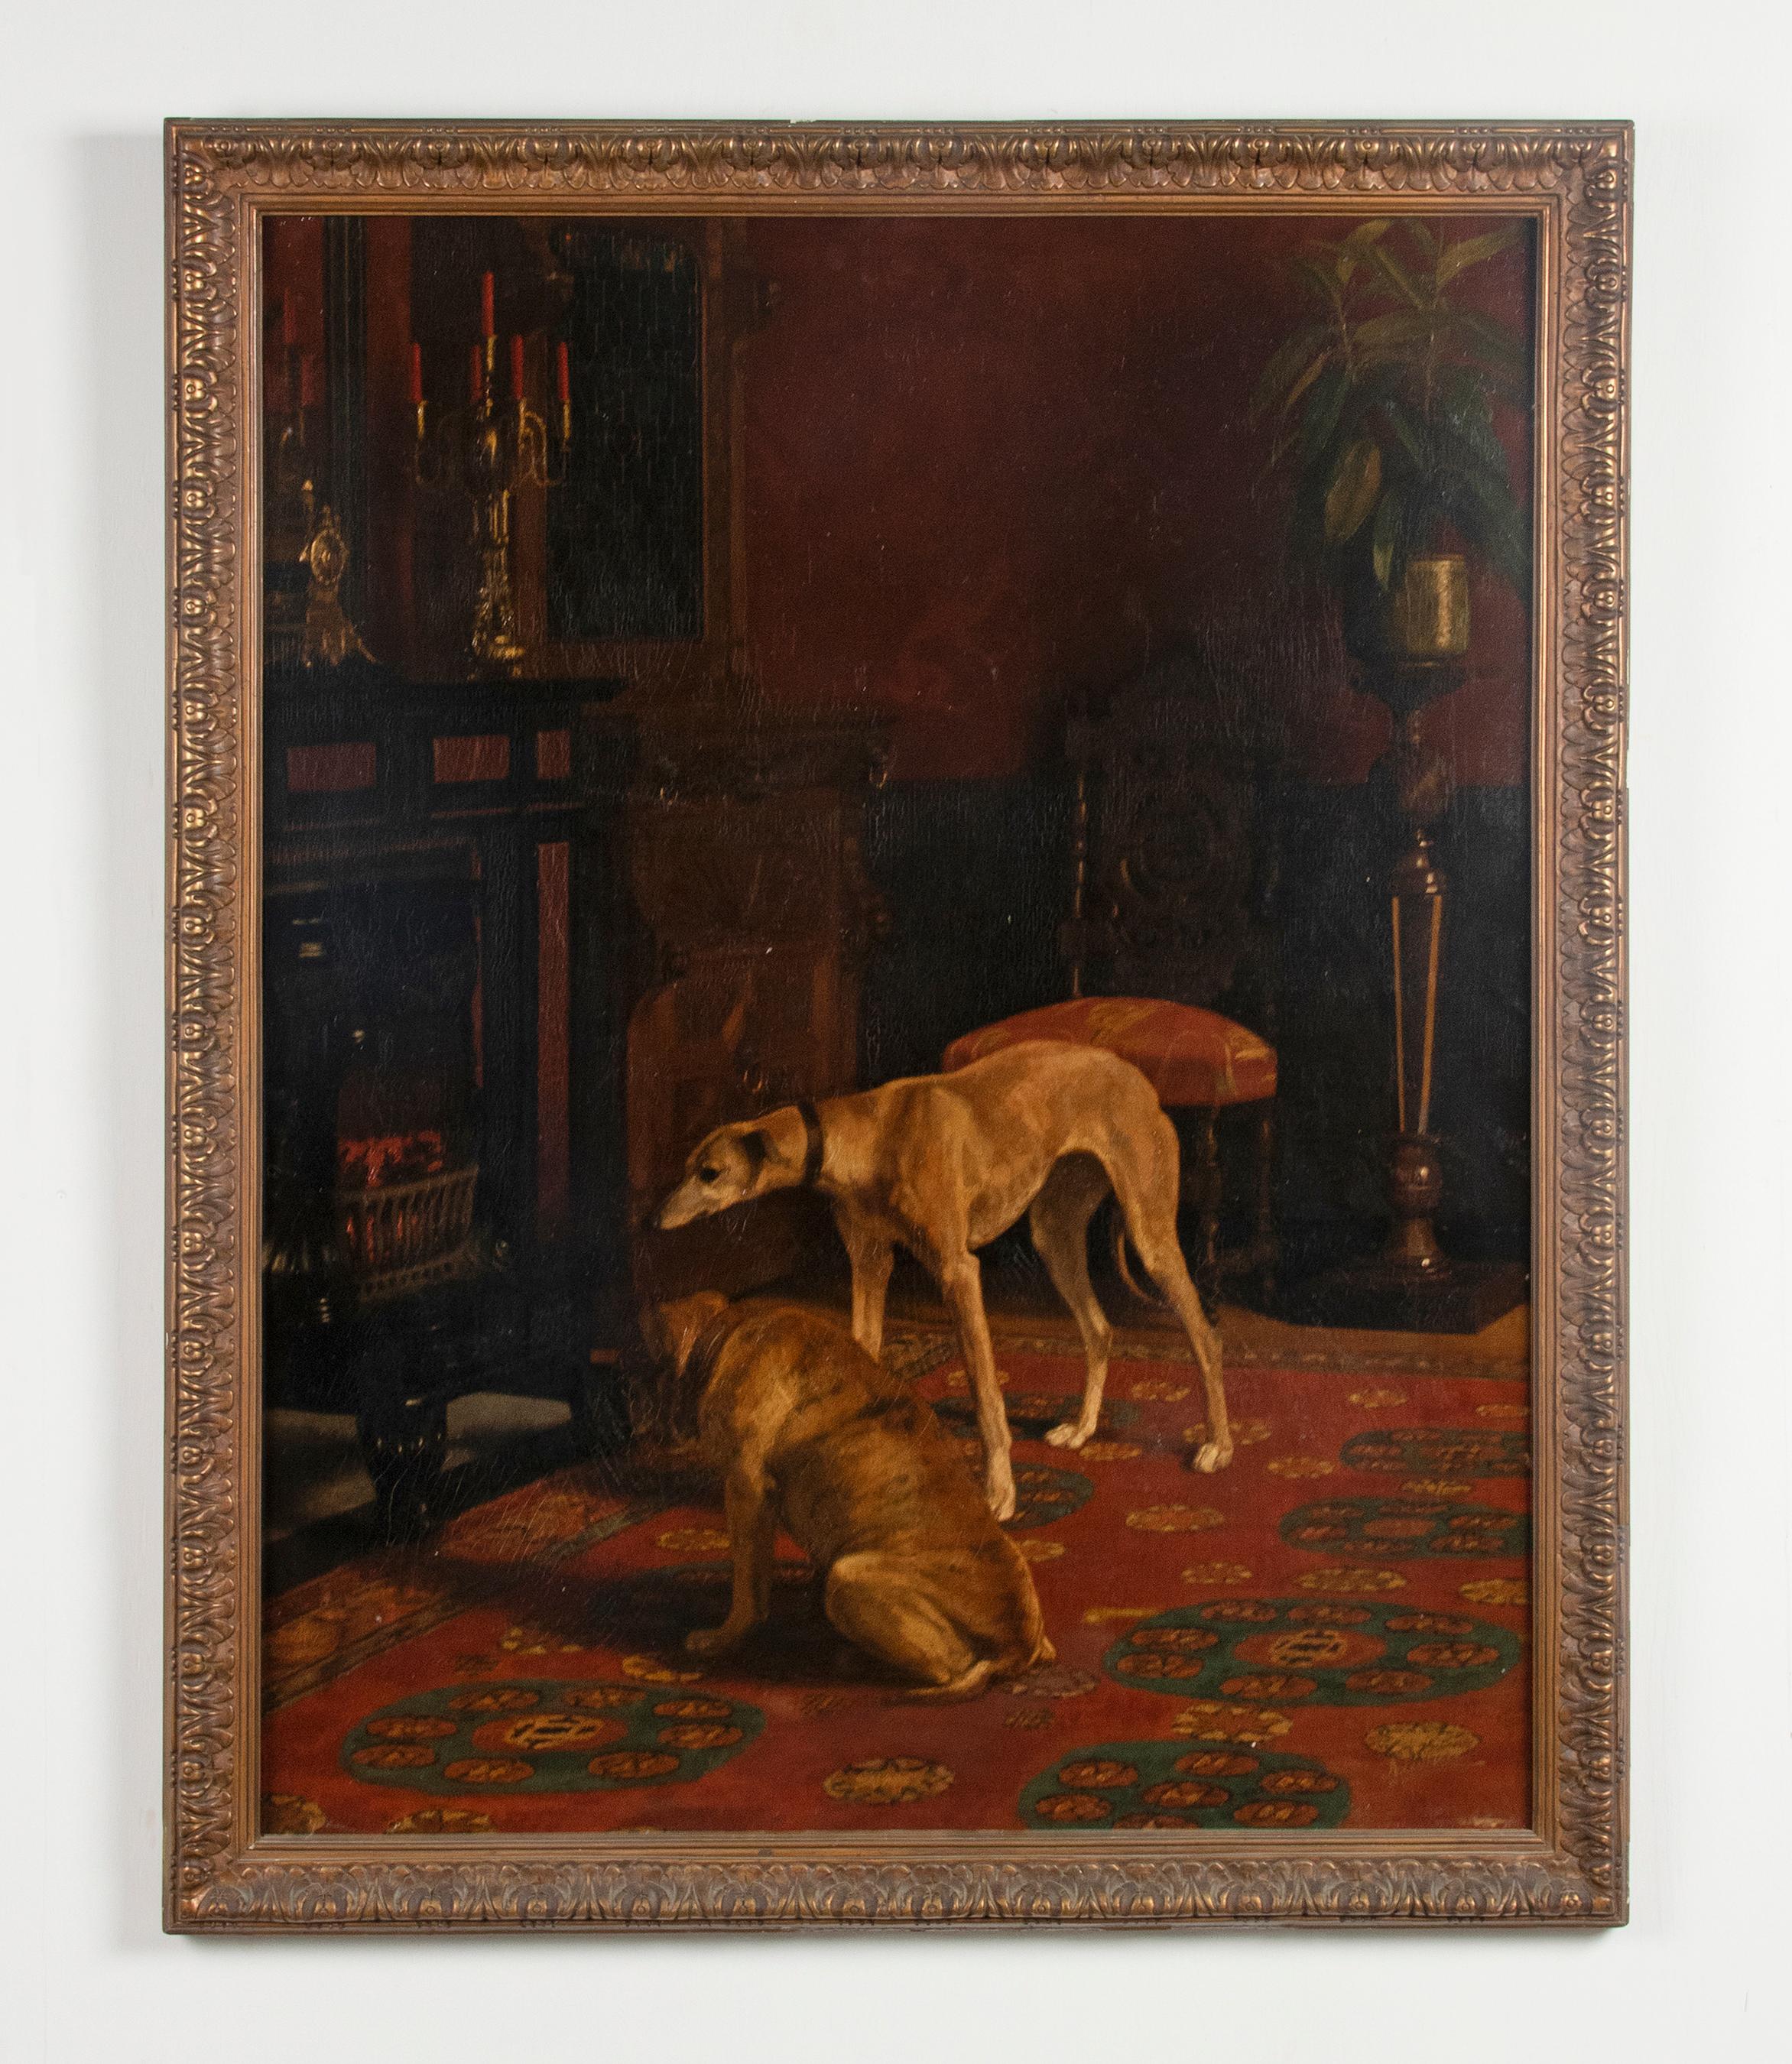 An antique oil painting on canvas with a Greyhound dog in front of the fire mantel. It is really striking and refined painted. The dark background and lighter foreground. Dating around 1900-1910, Belgium. The painting has craquelure, the pictures